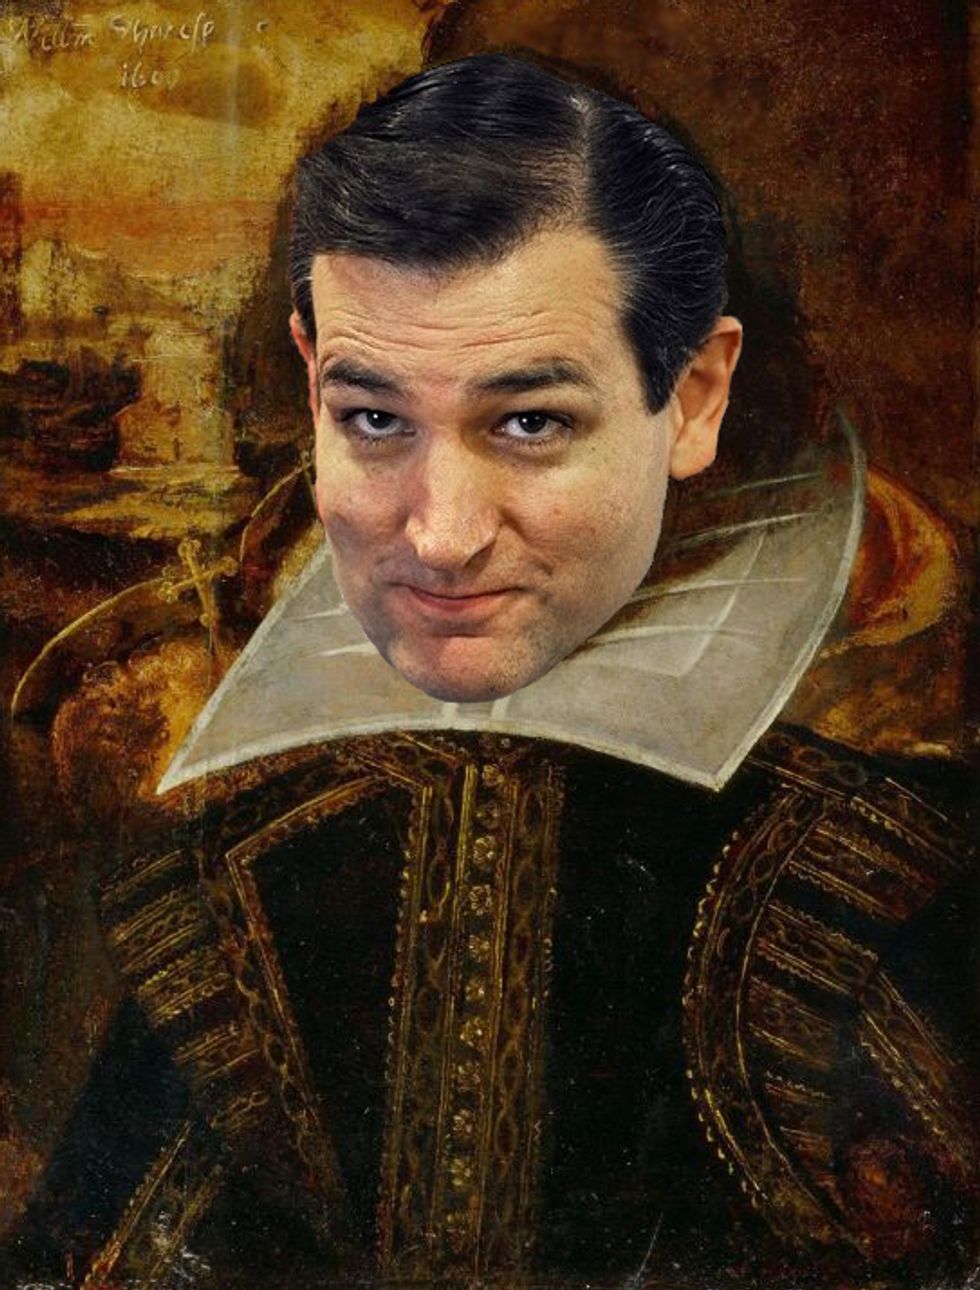 Mean New York Times Won't Let Ted Cruz Cheat His Way Onto Bestseller List